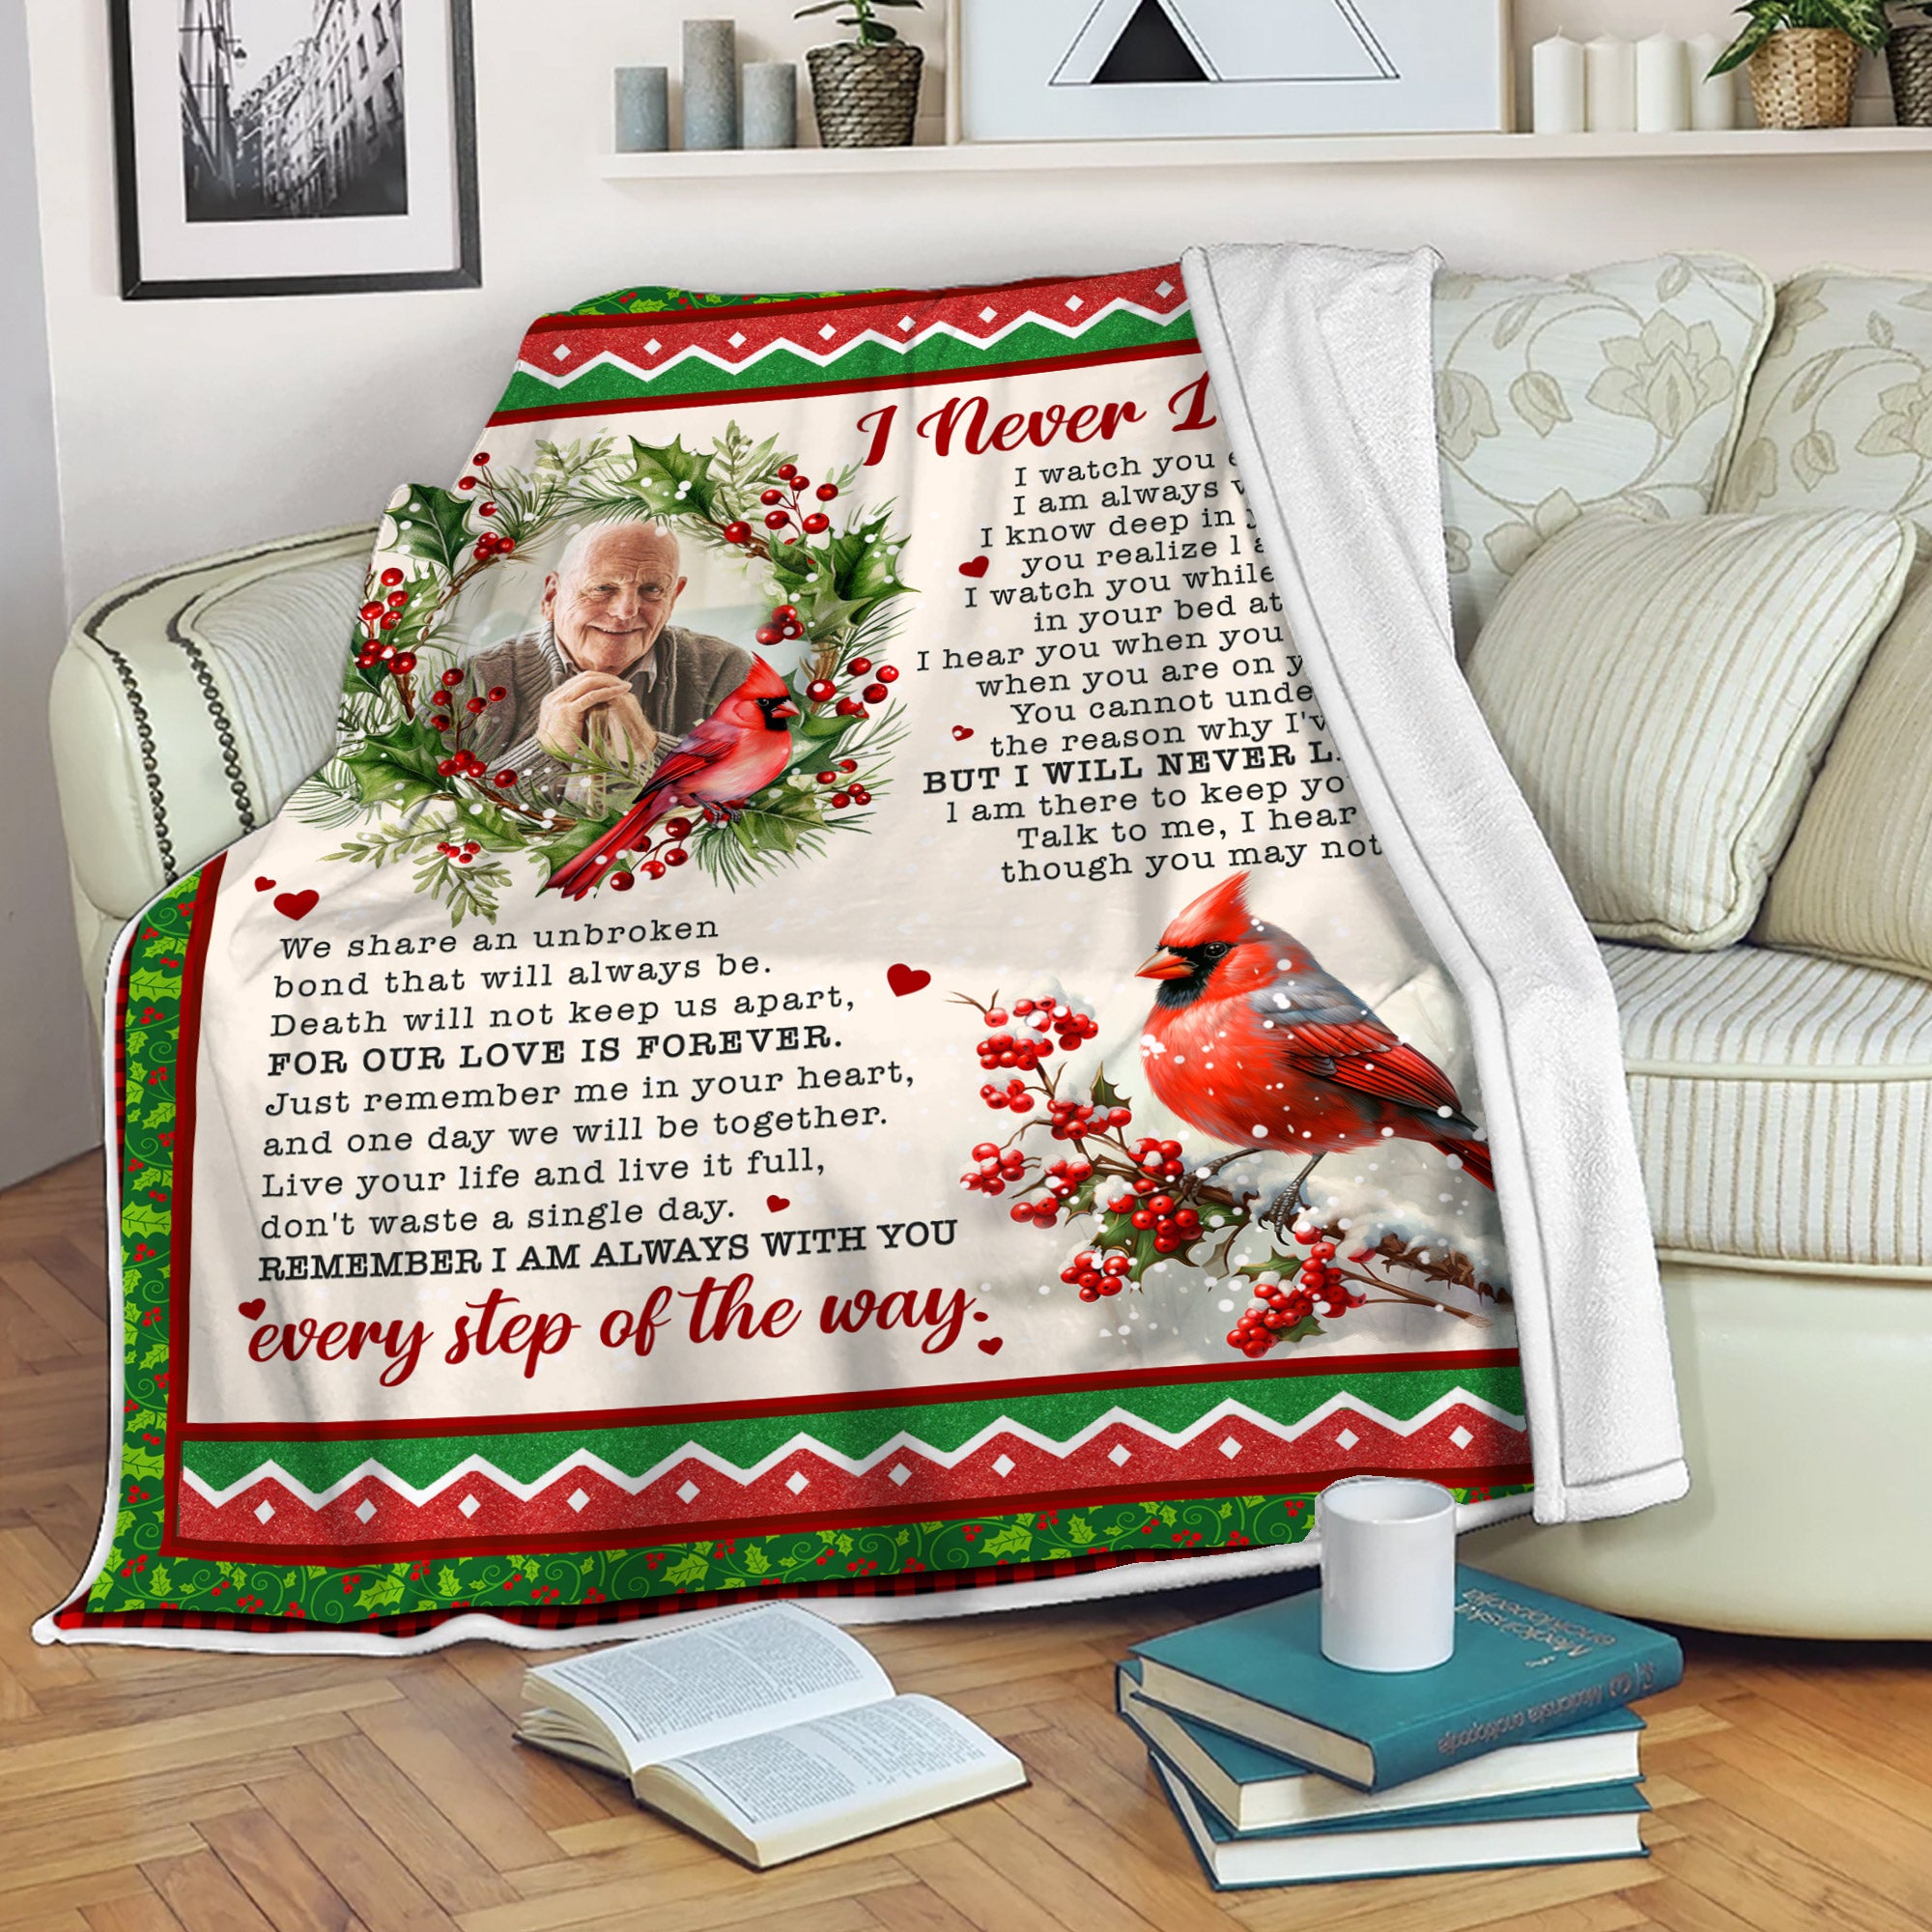 Personalized Memorial Blankets With Pictures Of Loss of Grandparent - I Never Left You Blanket